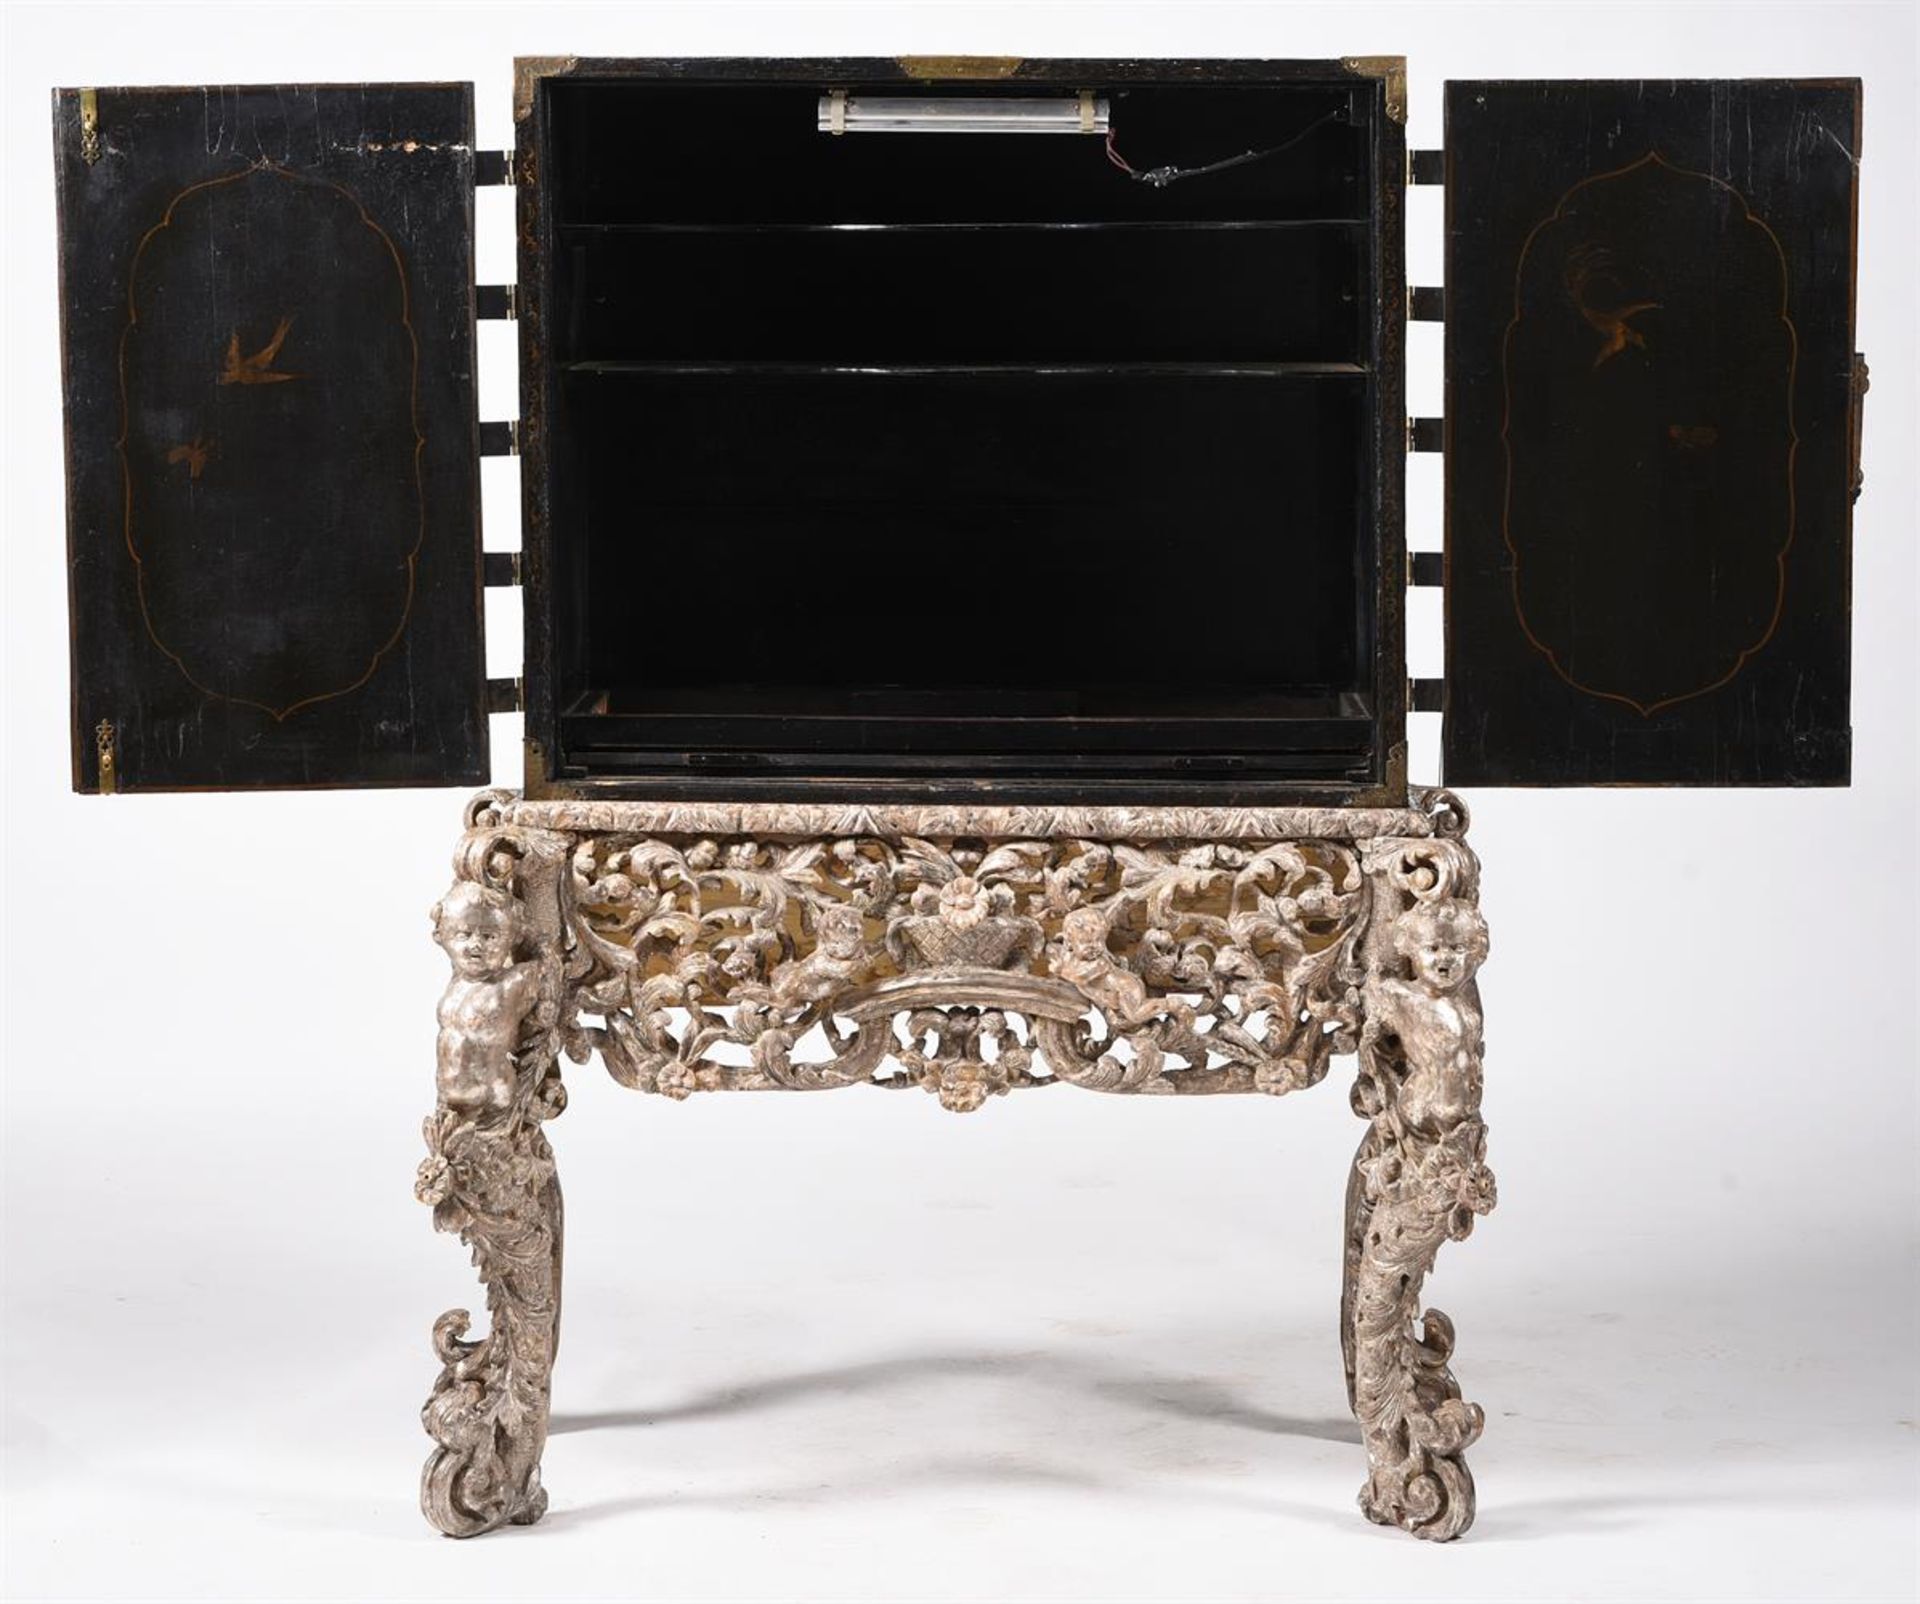 A BLACK LACQUER AND DECORATED CABINET ON SILVERED STAND - Image 7 of 7